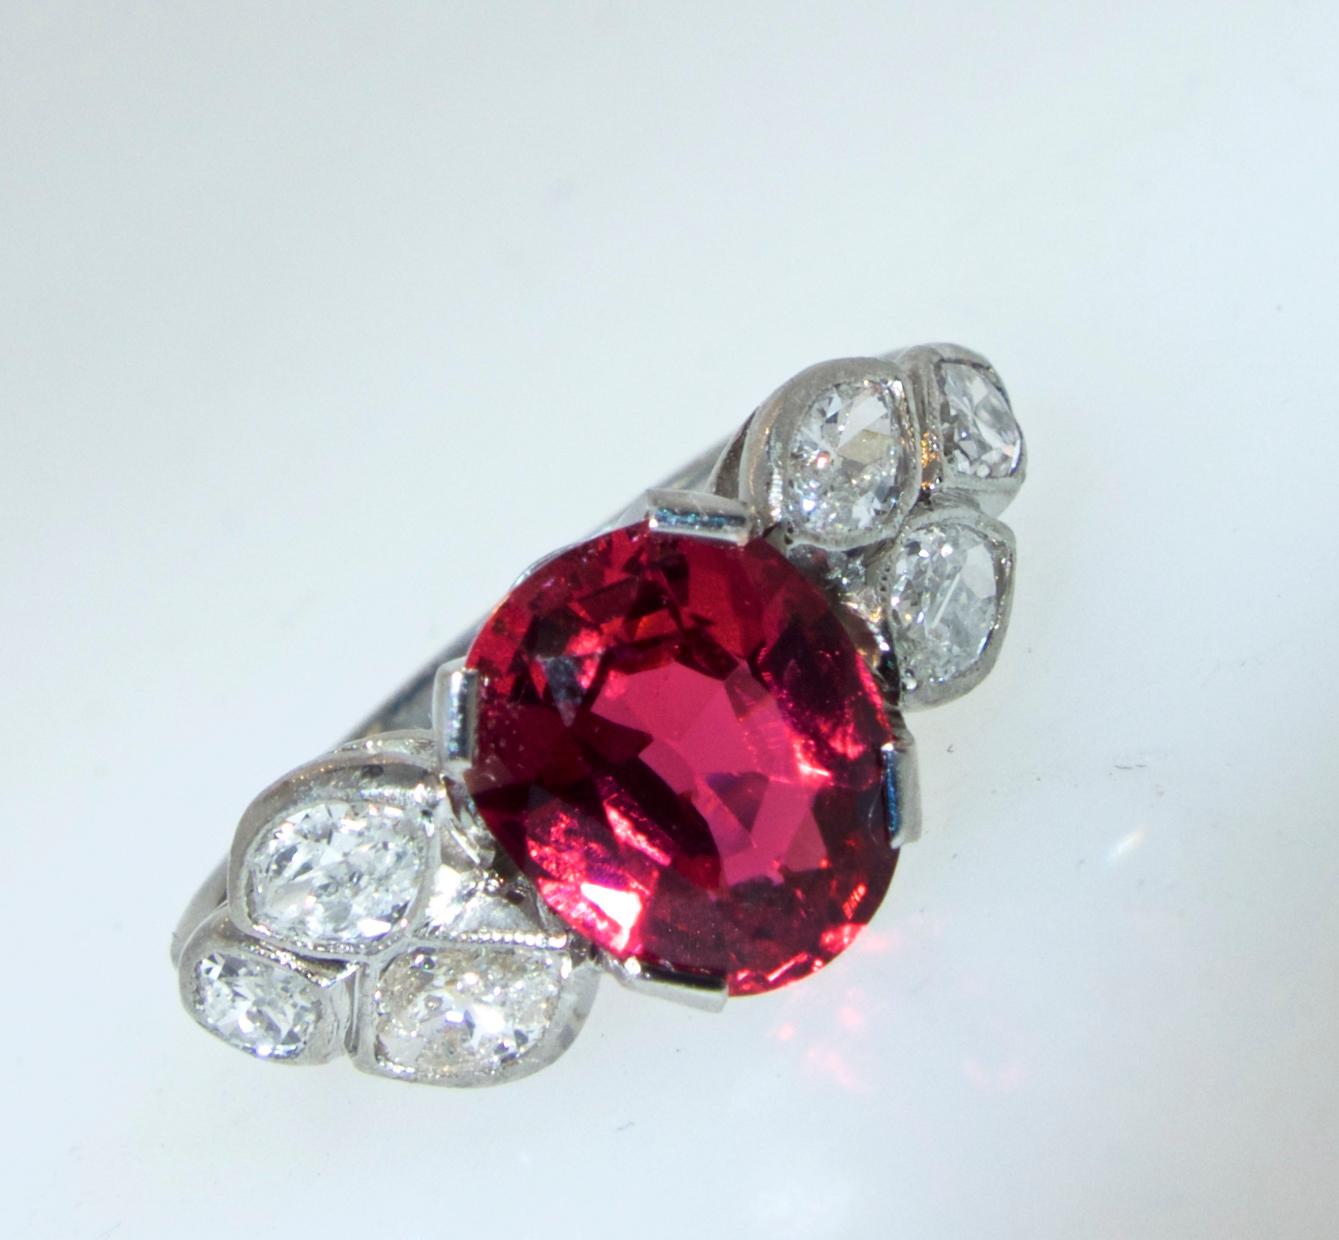 The center natural spinel is clear, bright and a vivid red color.  It weighs 2.04 cts.  Accenting this center stone are fine white diamonds.  The 6 marquis cut diamonds are all well matched, well cut and white.  They are approximately very slightly